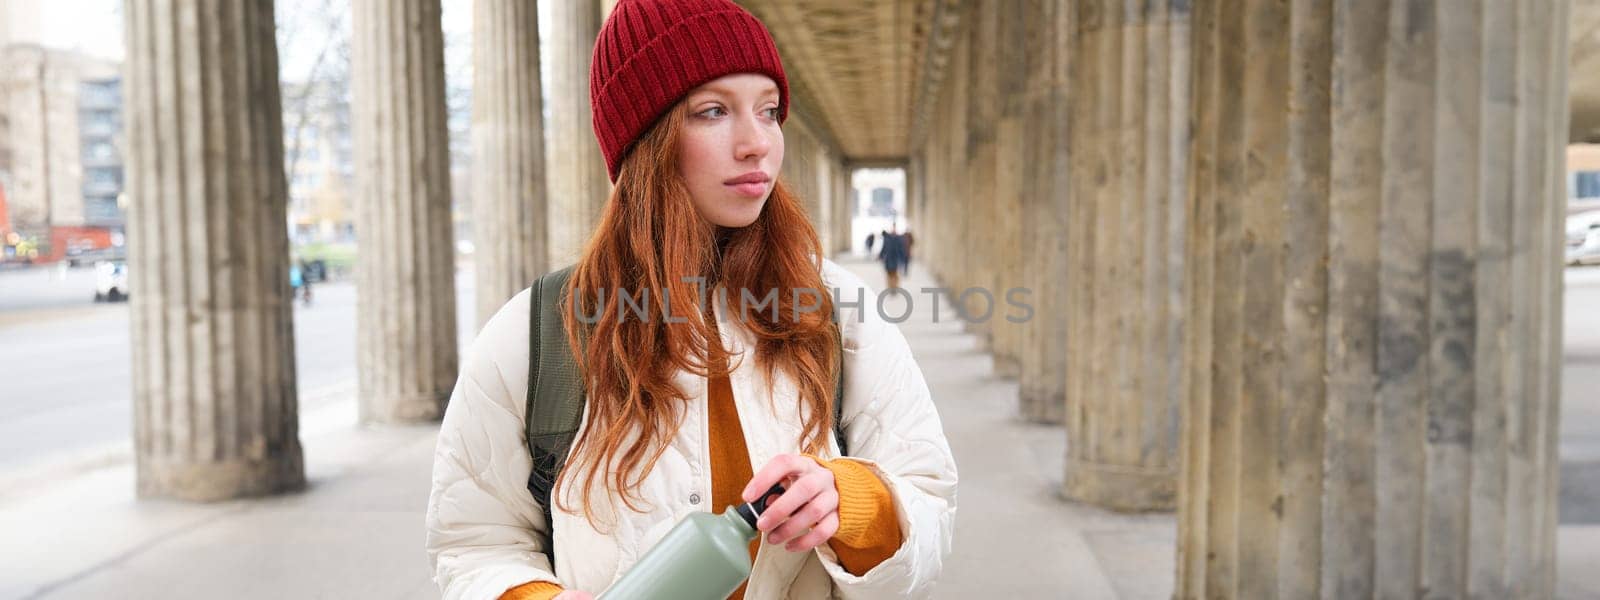 Young redhead girl holds thermos in hands, pours herself a hot drink while walking in city. Tourist takes break, opens flask for refreshment beverage.